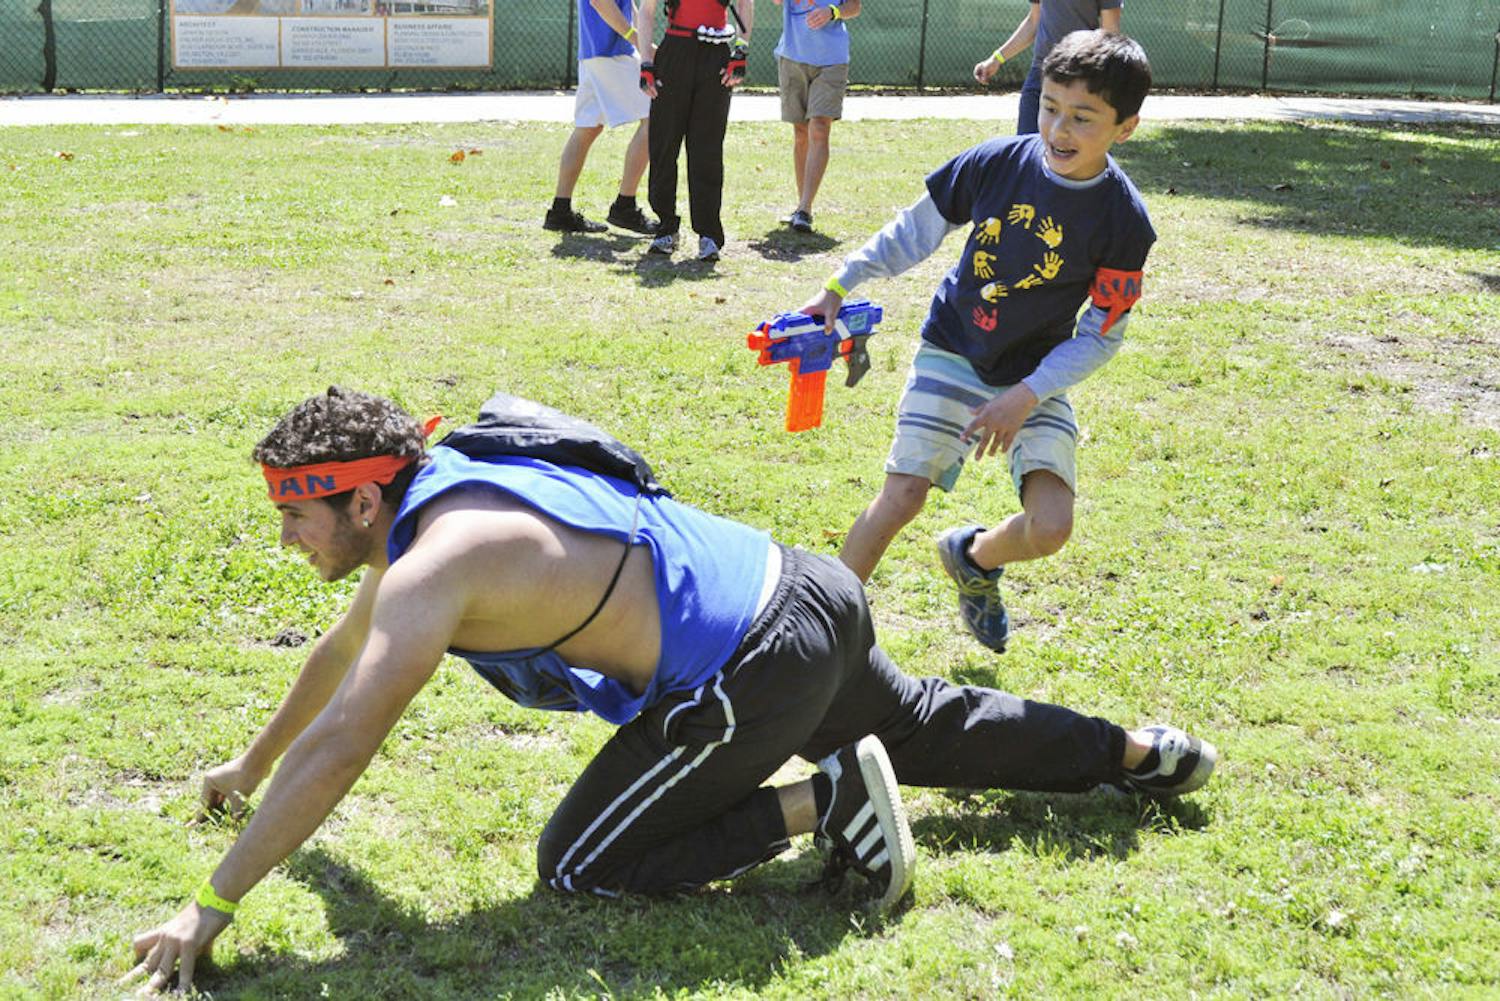 Nick Mullen, 12, chucks a sock at a zombie during a Humans vs. Zombies mini-mission for Children's Miracle Network Hospitals on the North Lawn on Saturday. Mullen was born with hypertrophic cardiomyopathy and has been treated at UF Health Children’s Hospital, where his mother, Jodi, is a pediatric nurse.